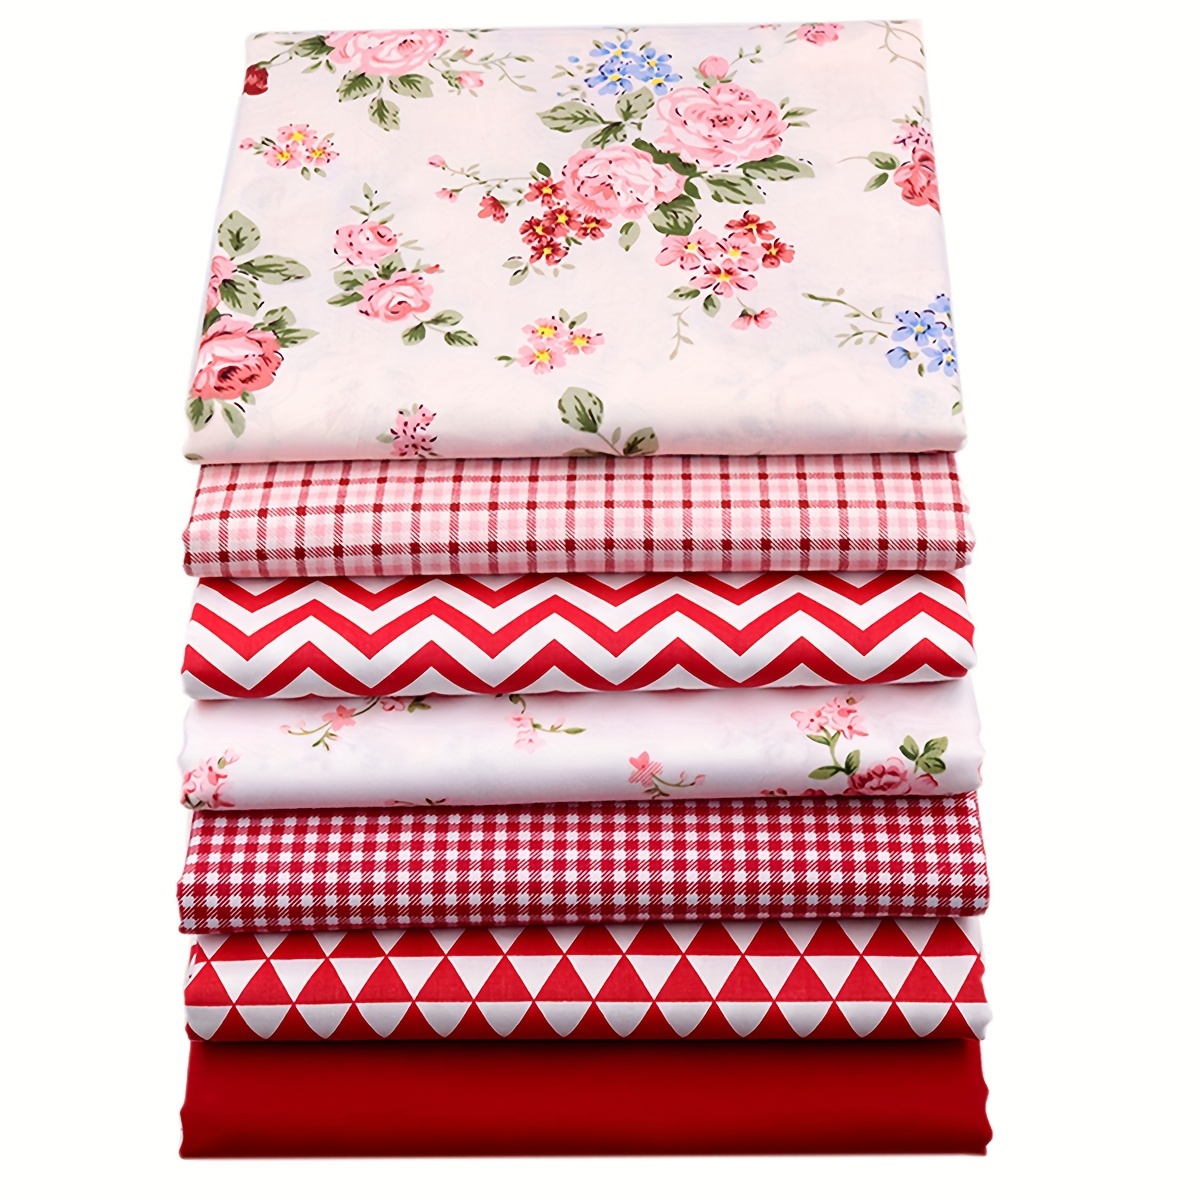 

7-piece Red Floral Cotton Fabric Bundle, 15.7" X 19.7" Pre-cut Fat Quarters For Diy Sewing And Patchwork Crafts